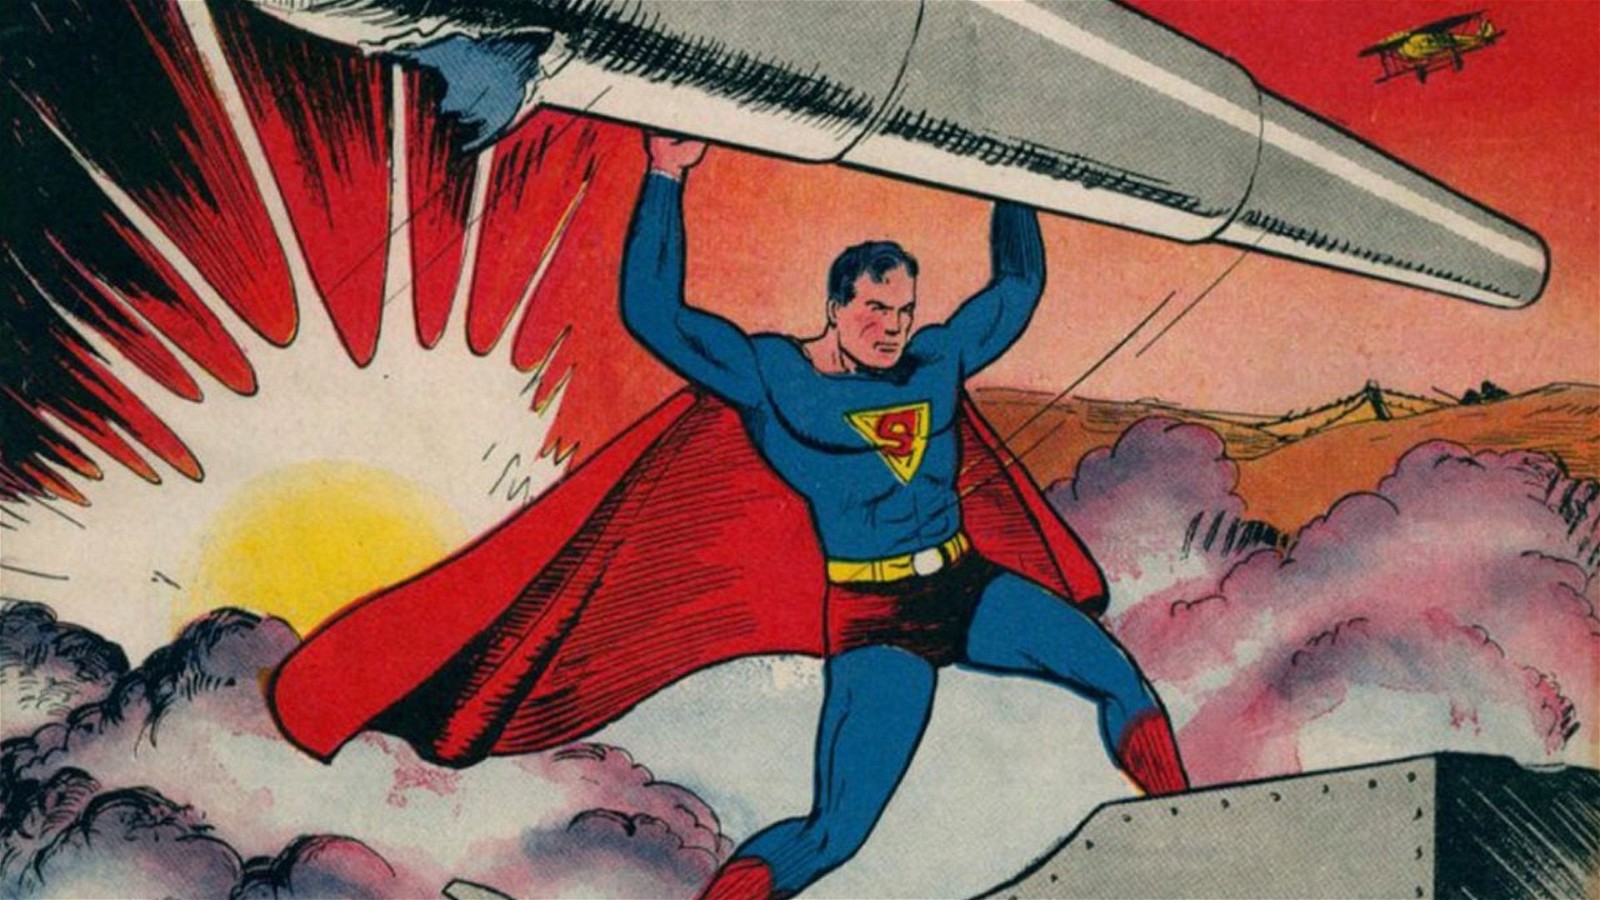 One of the original Superman comics that serve as an inspiration for Superman Legacy